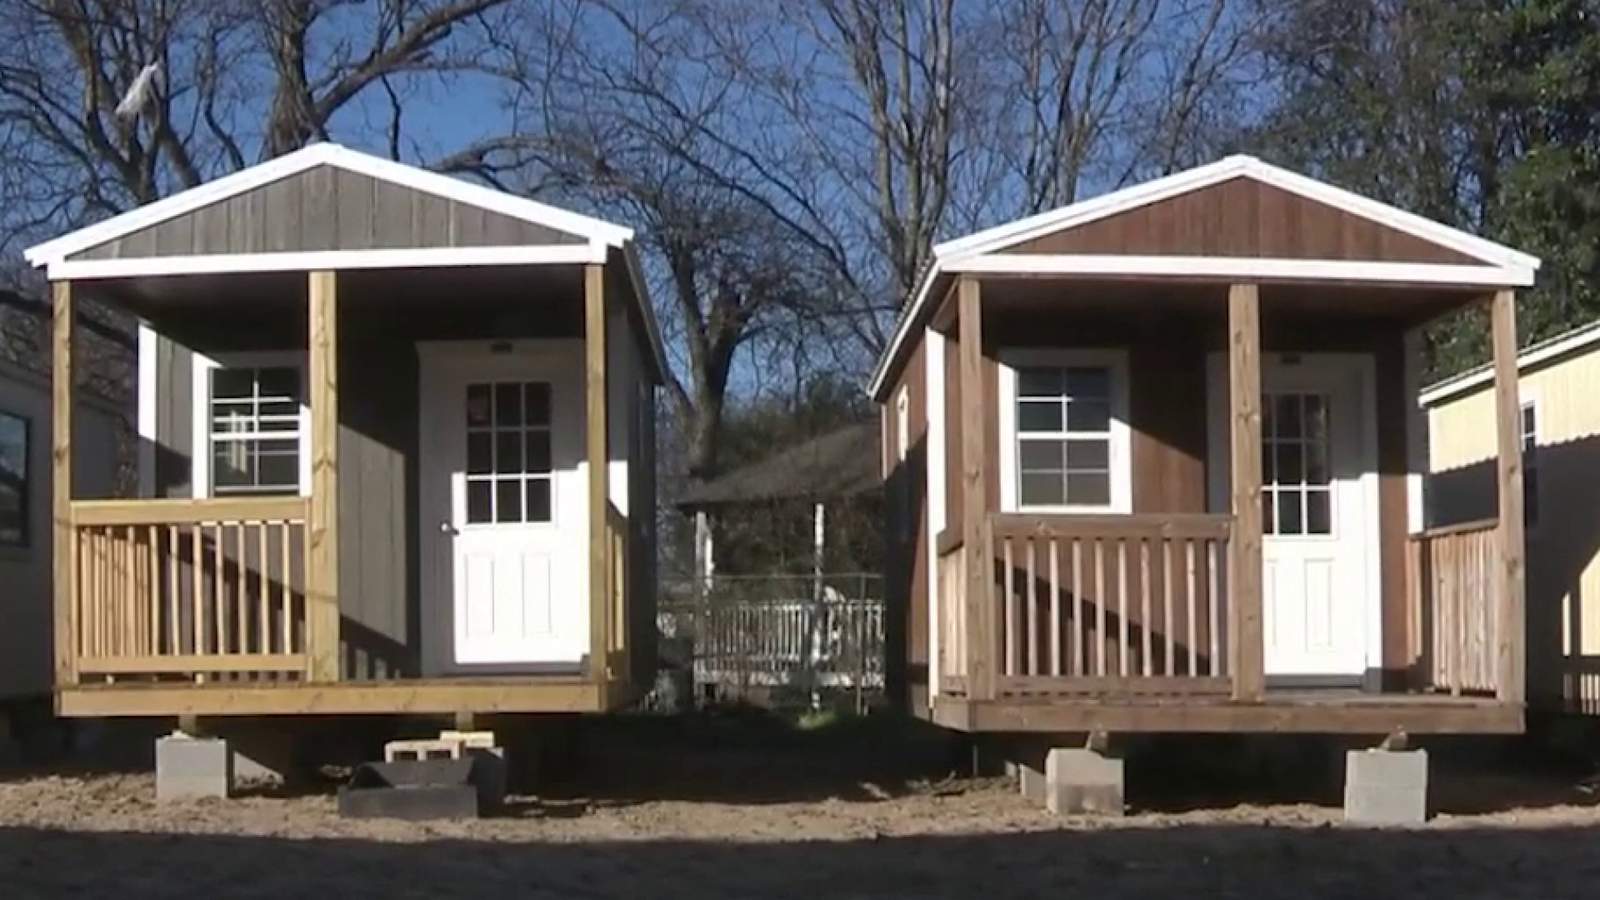 The tiny home movement is becoming more popular in these states